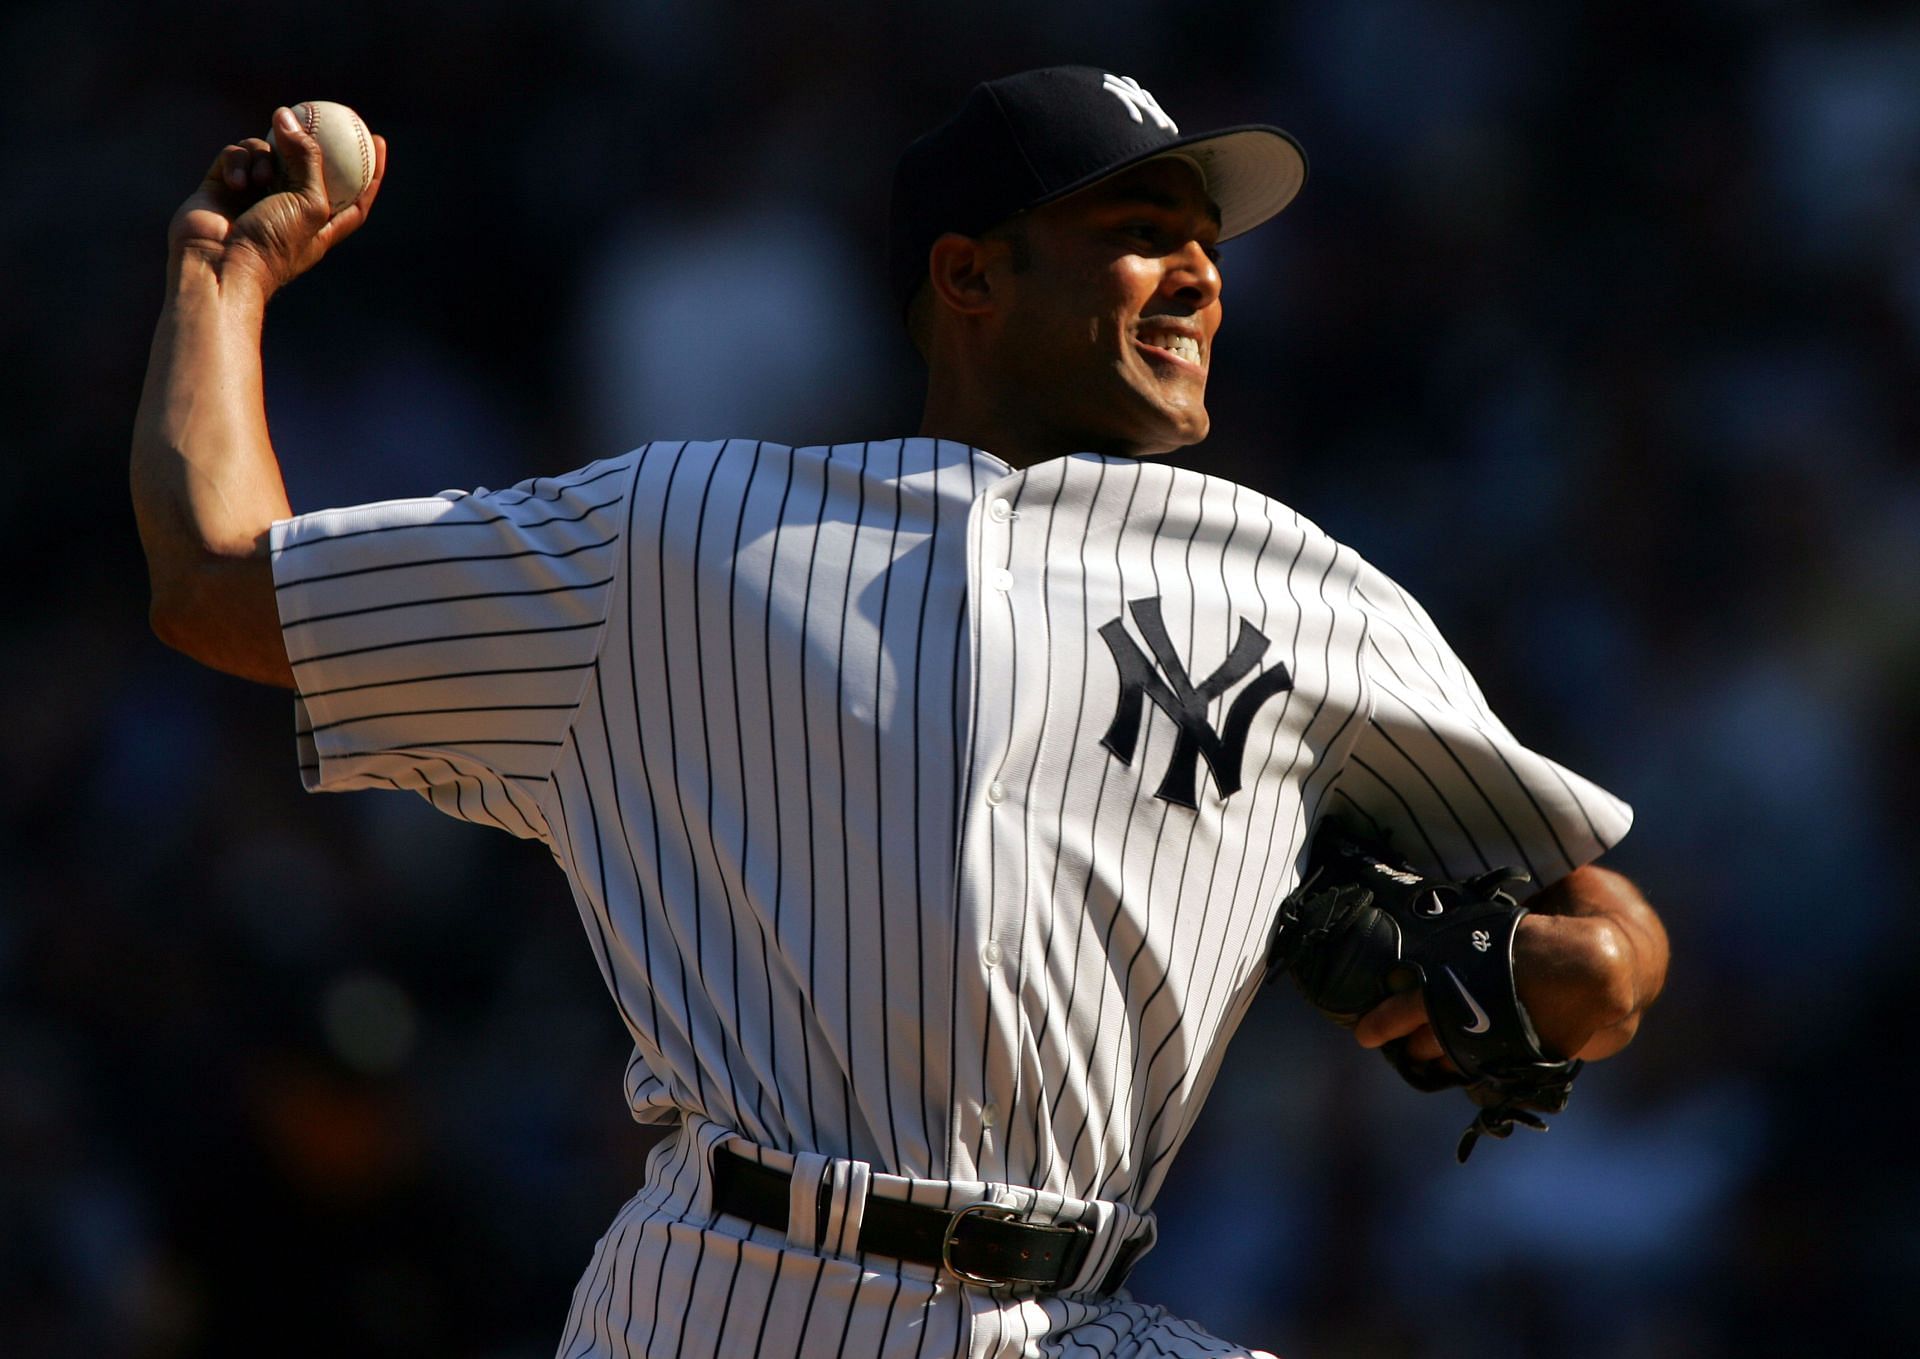 Retired Yankees pitcher Mariano Rivera in Israel on interfaith mission